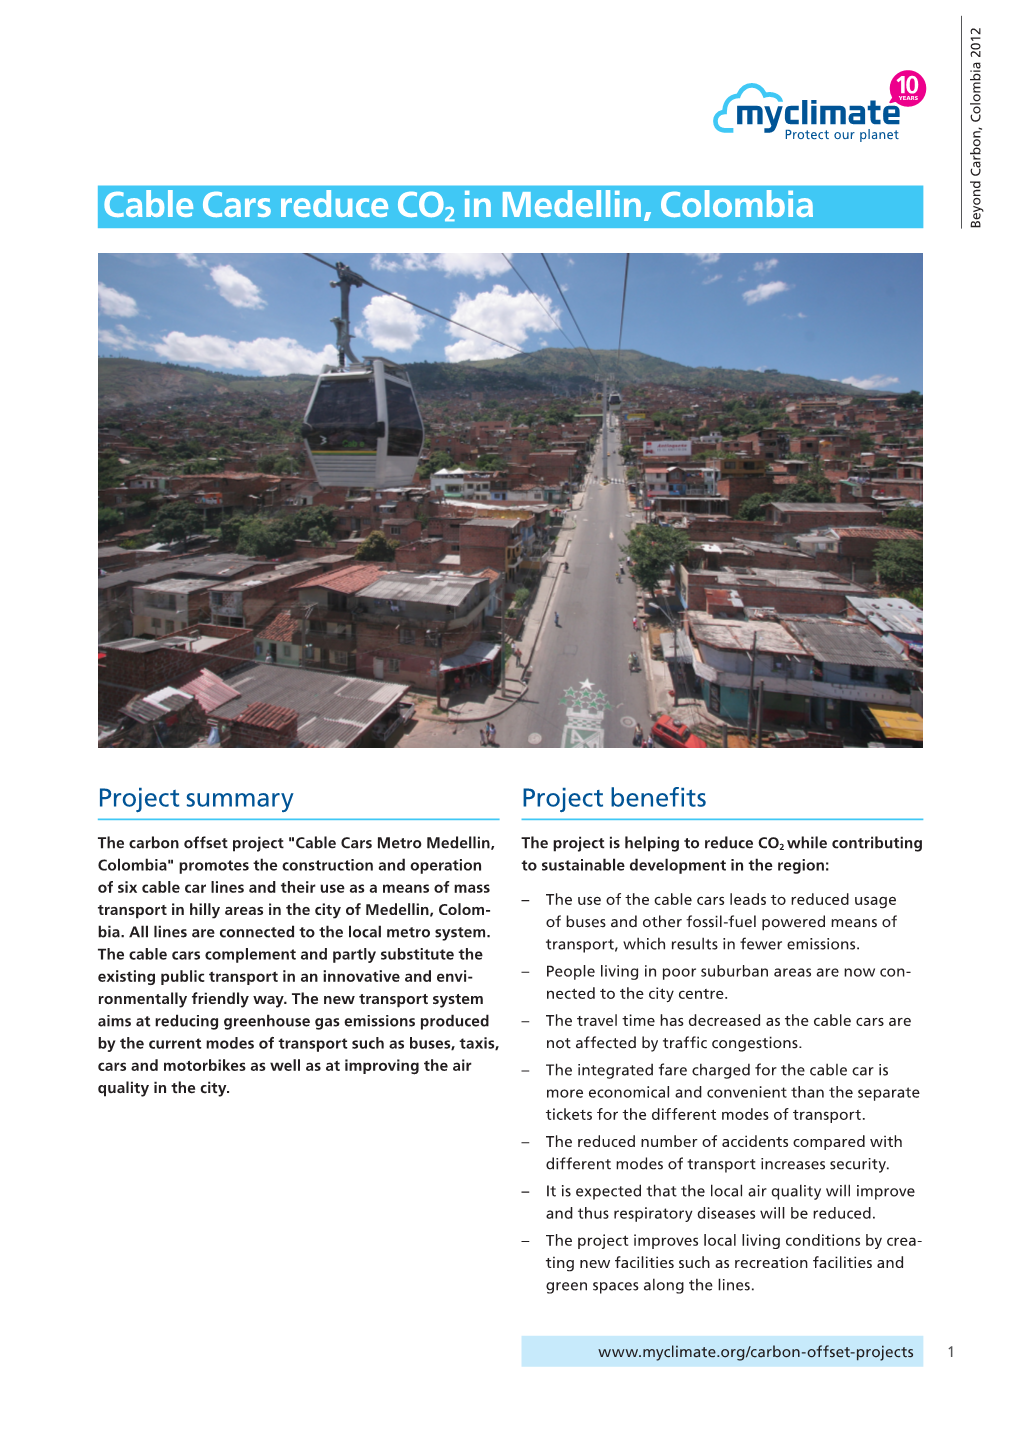 Cable Cars Reduce CO2 in Medellin, Colombia Beyond Carbon, Colombia 2012